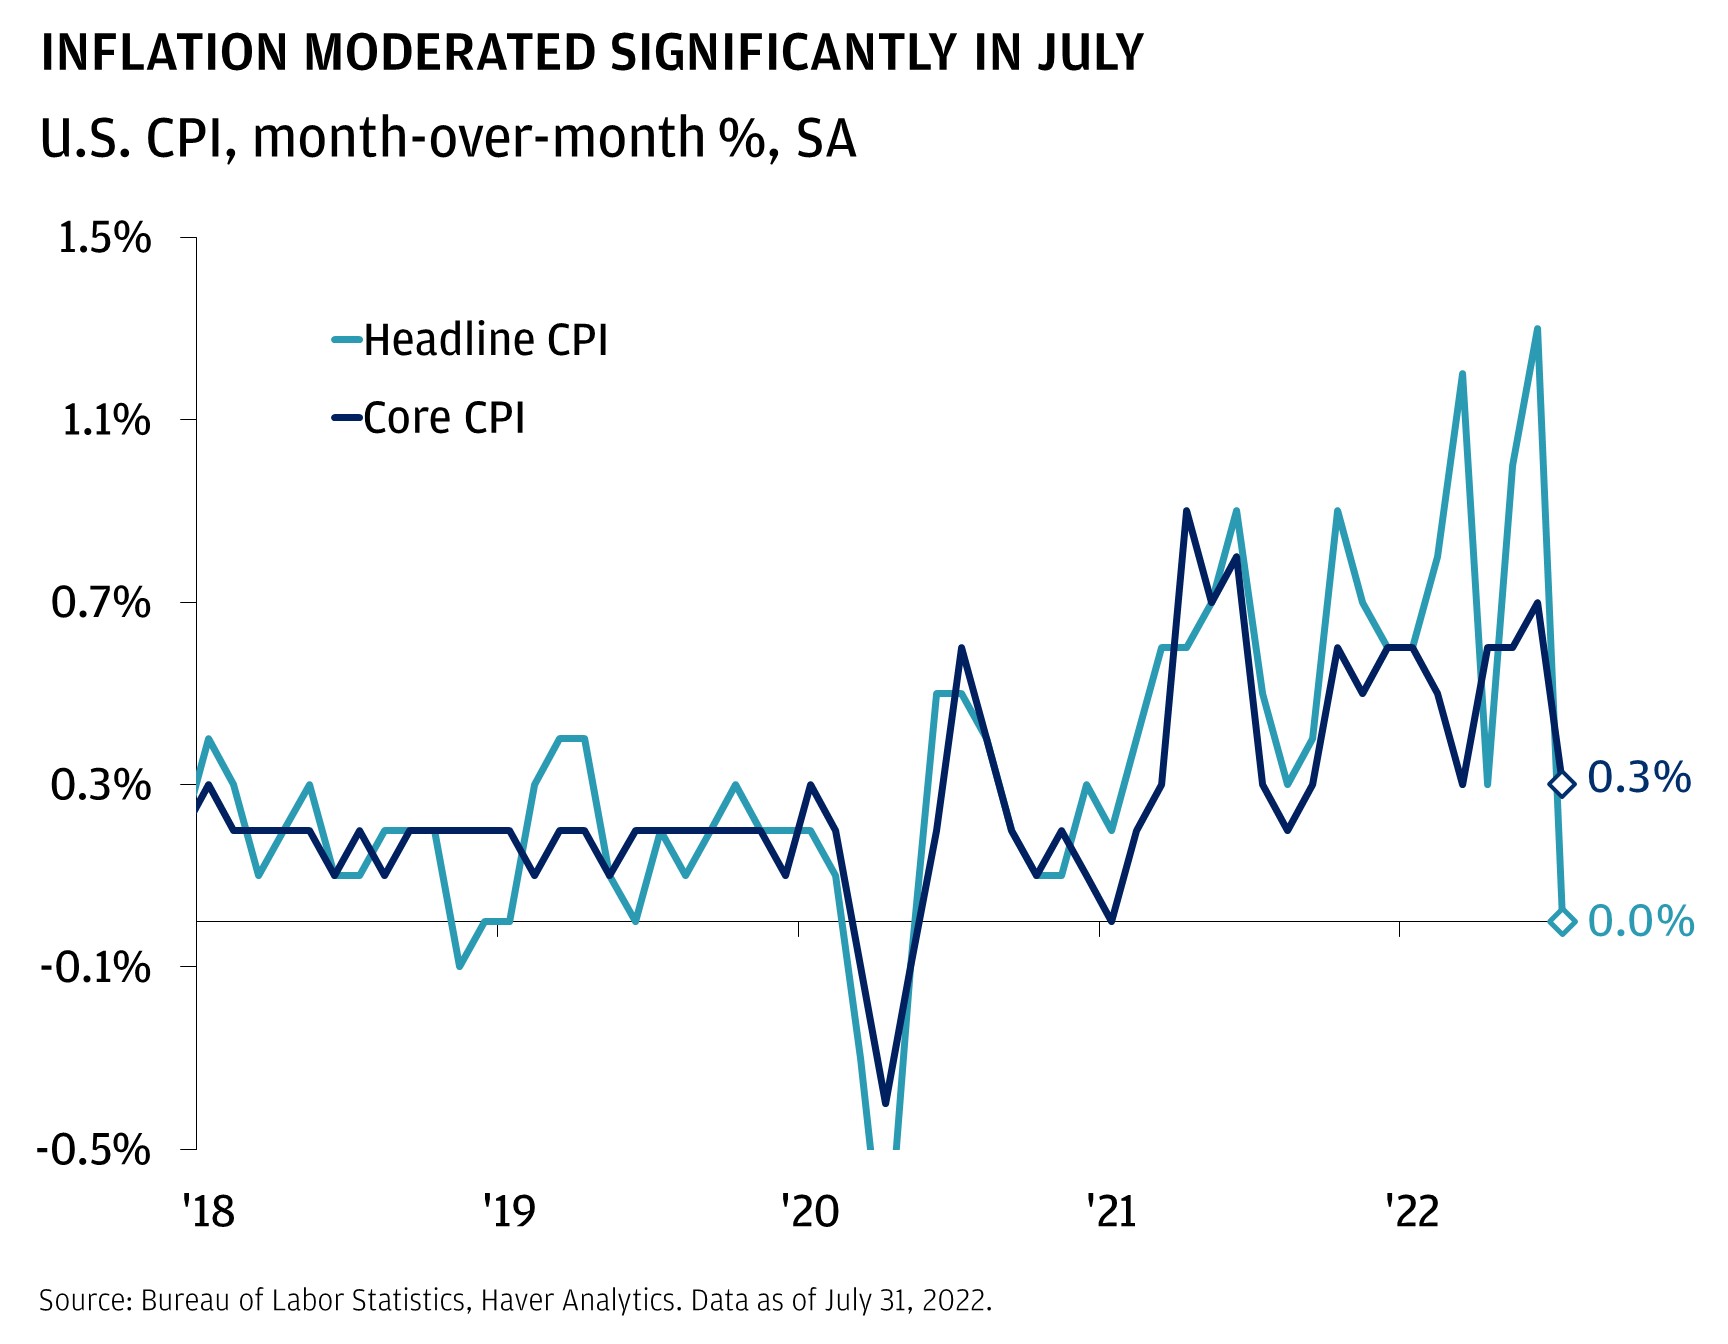 This graph shows headline and core CPI from January 2018 until July 2022.